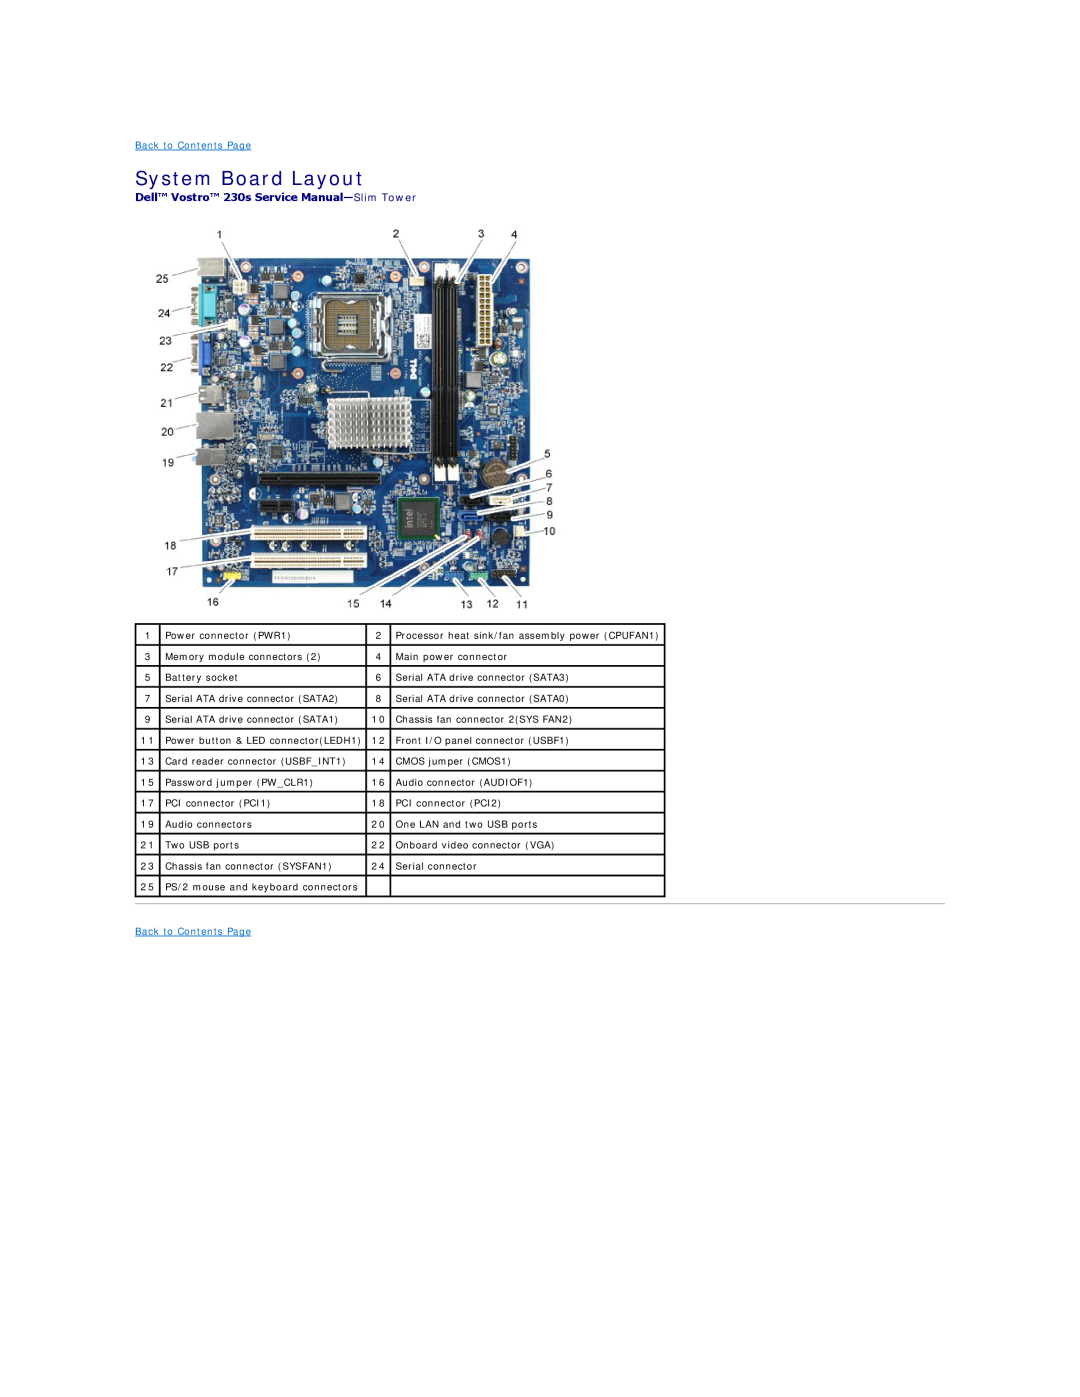 Dell 230S specifications System Board Layout, Dell Vostro 230s Service Manual-Slim Tower, Back to Contents Page 